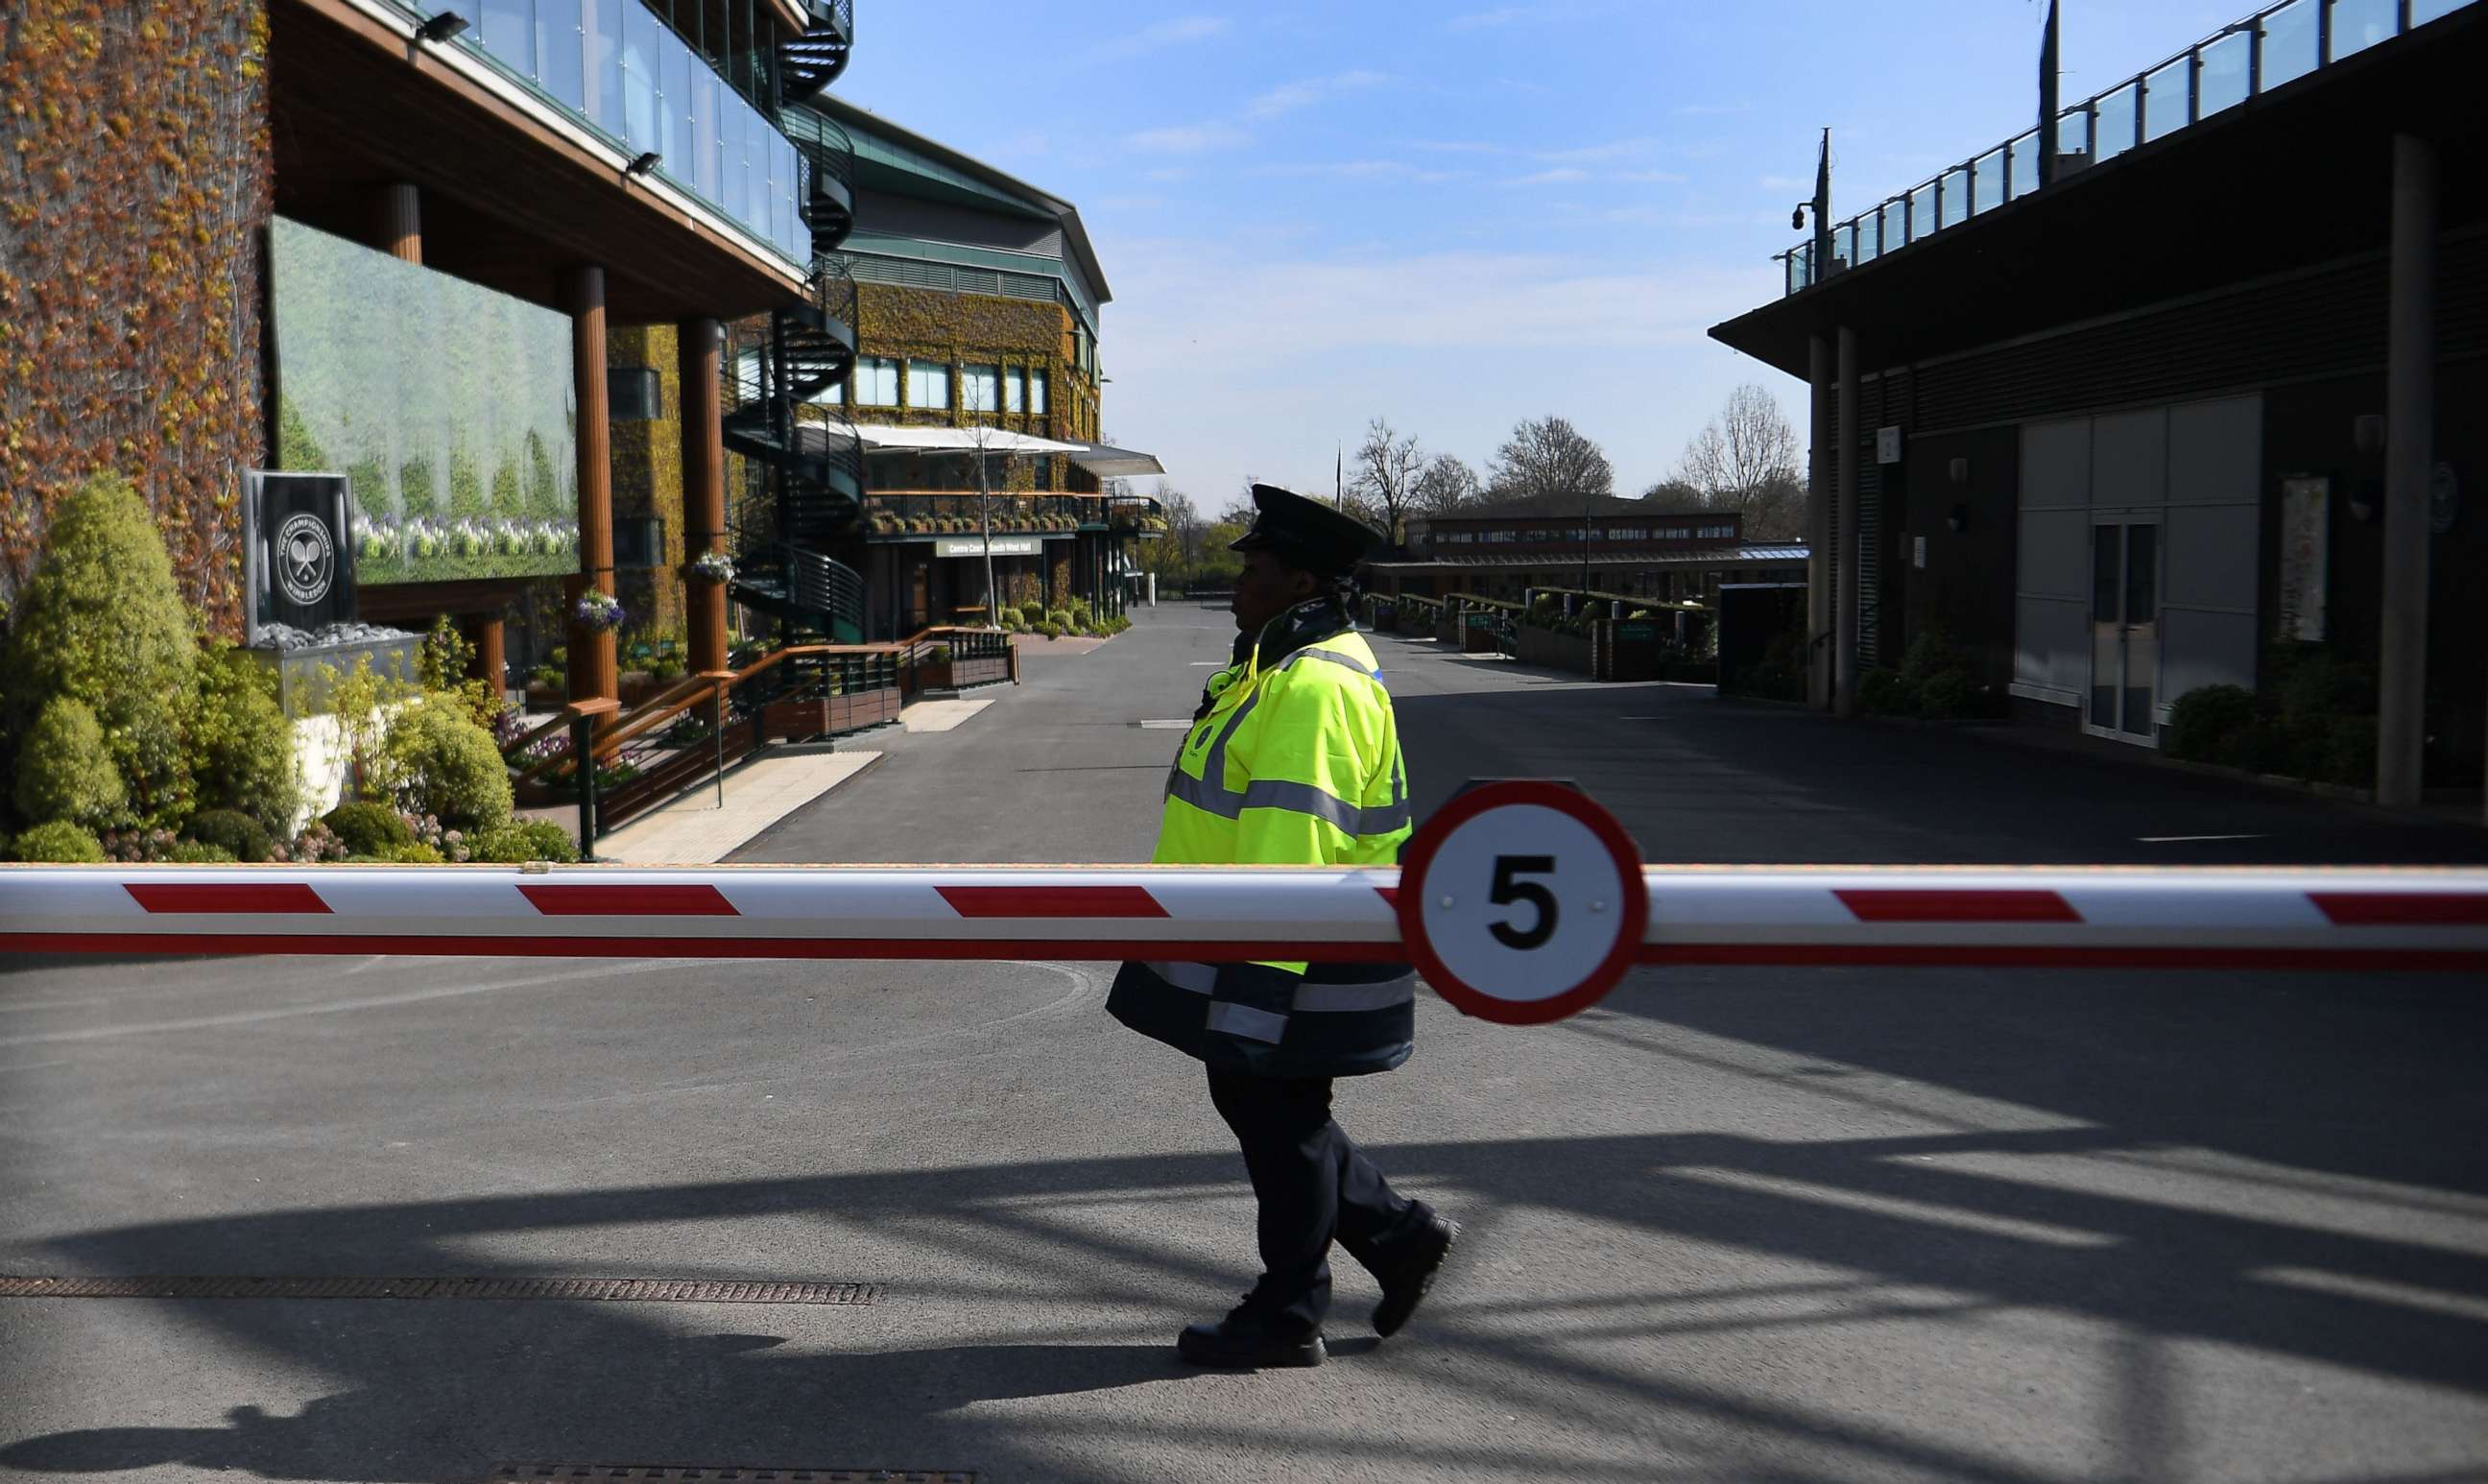 PHOTO: A security guard patrols at the All England Lawn Tennis Club in Wimbledon, London, April 1, 2020.